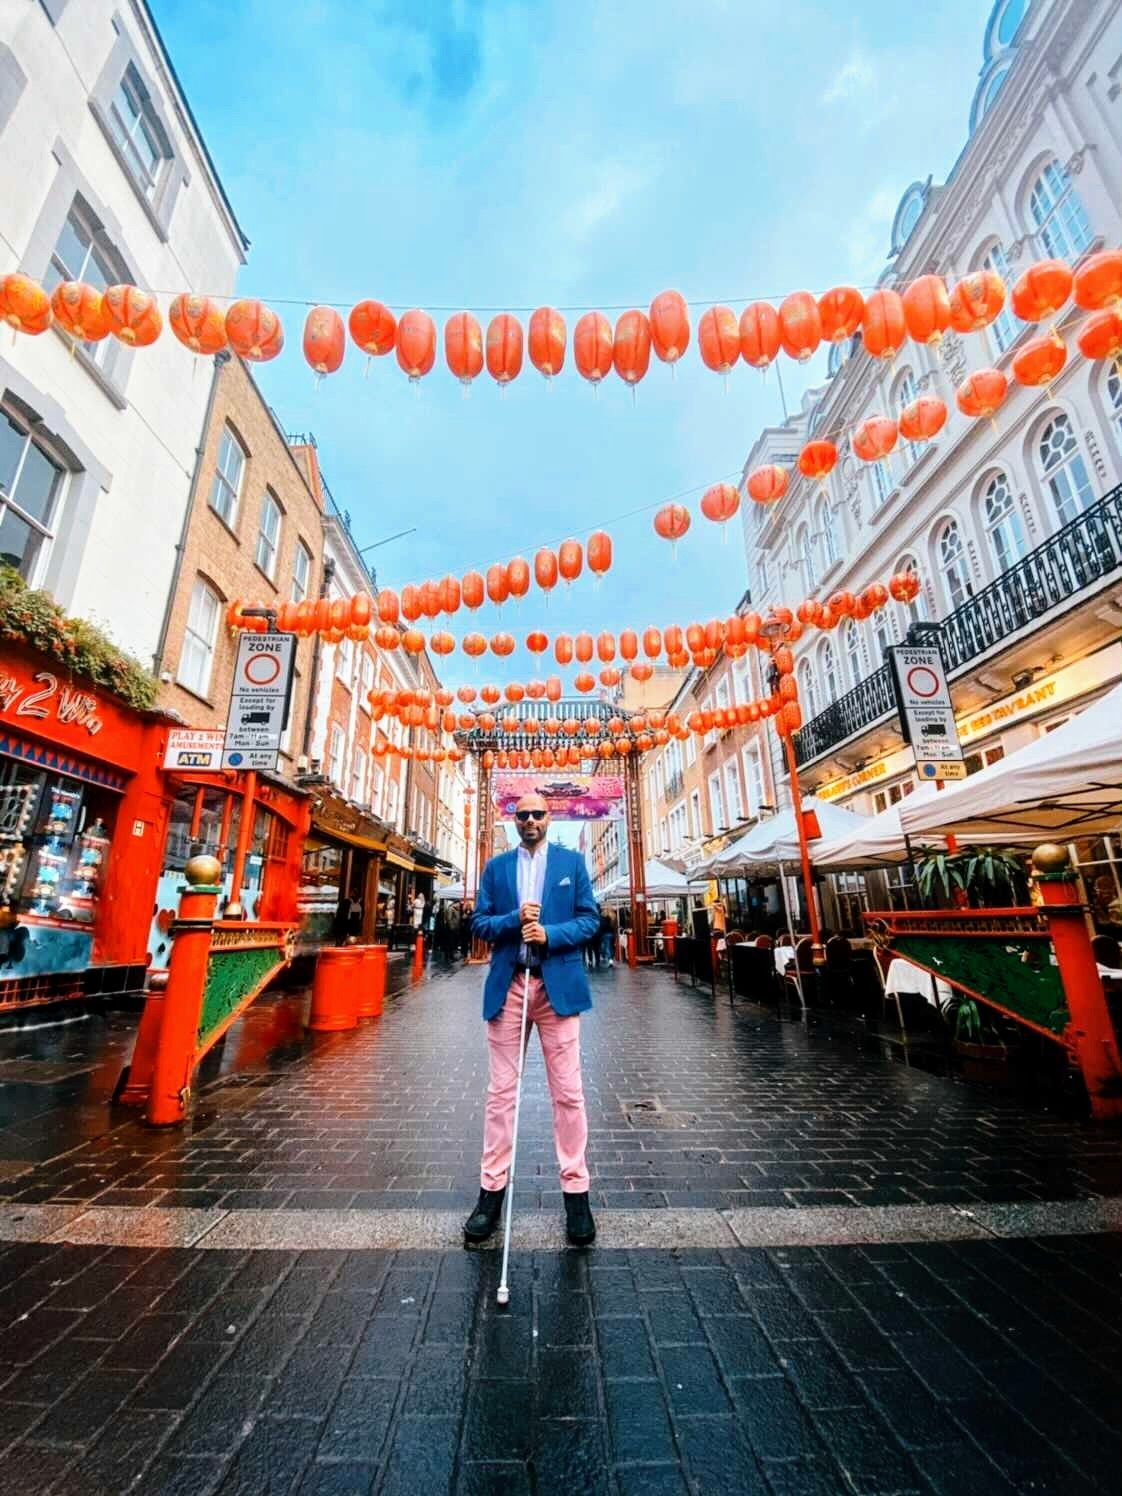 Yahya, a sharply dressed young man wearing pink pants, a blue blazer and dark glasses, holding his mobility cane in the middle of a cobblestone street decorated with bright paper lanterns.